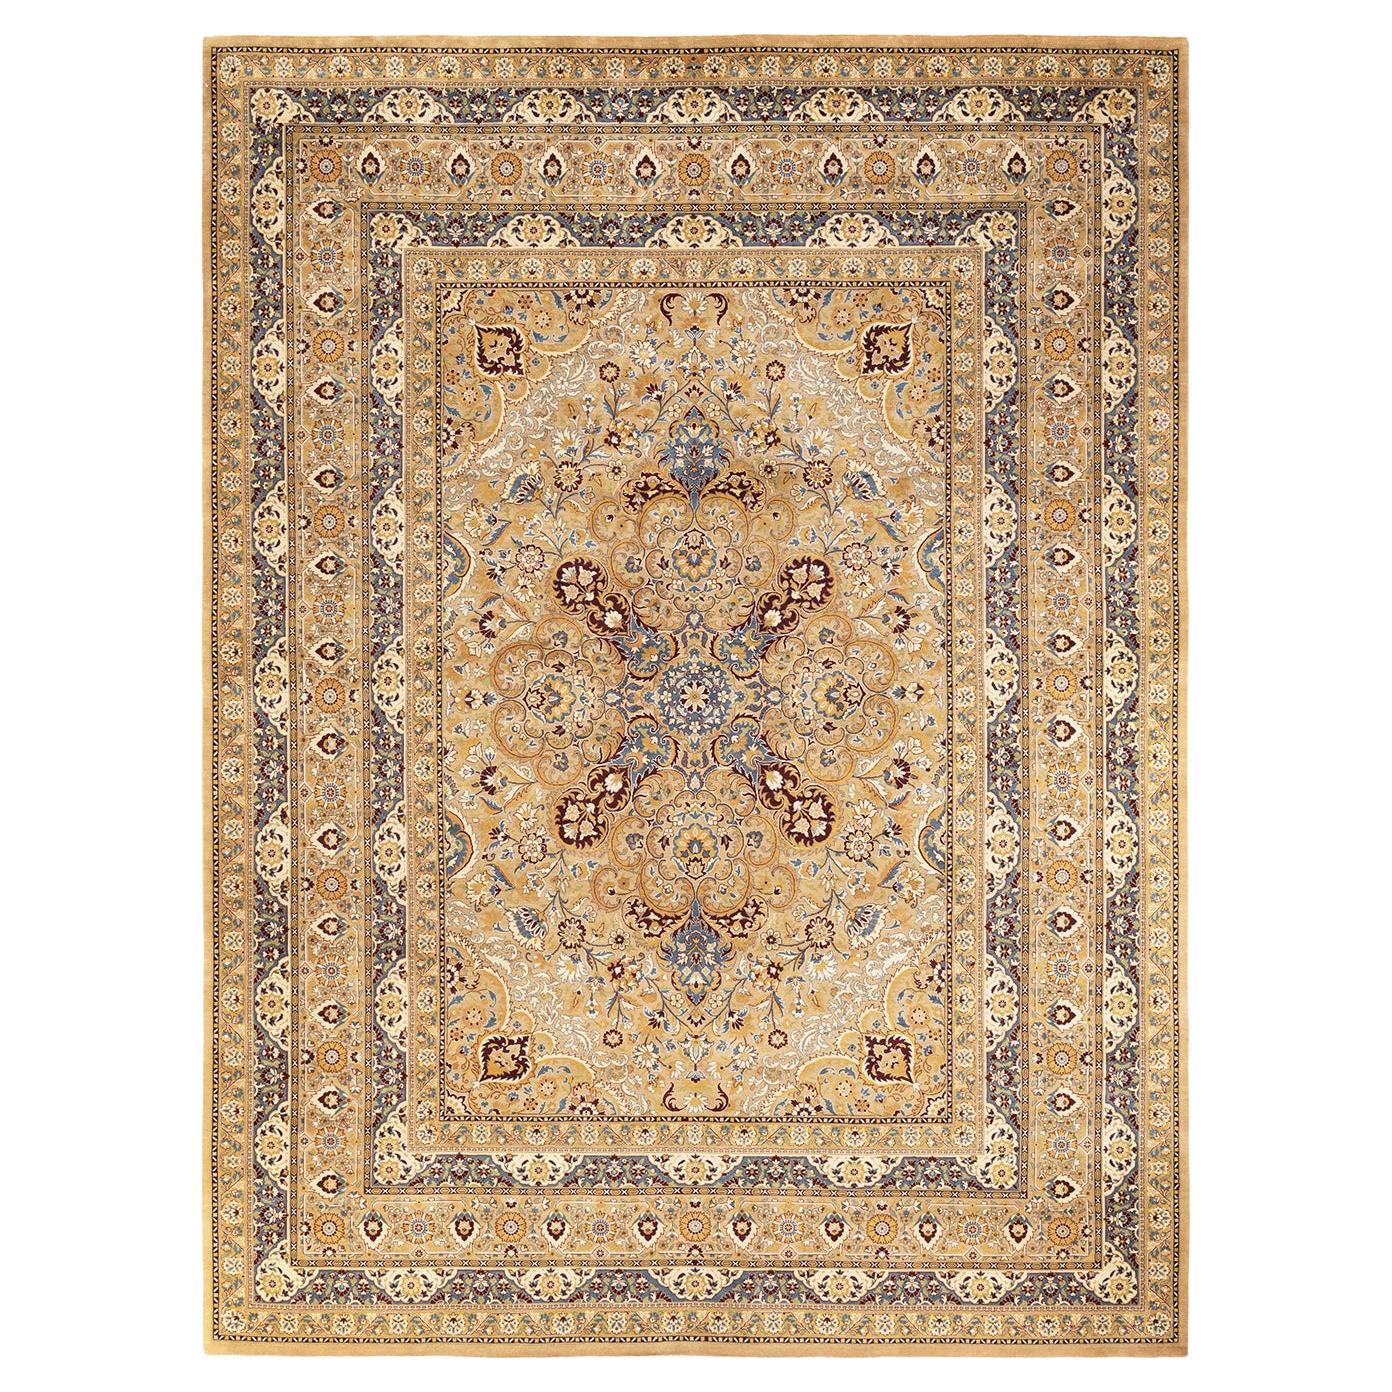 One-of-a-kind Hand Knotted Wool Mogul Yellow Area Rug